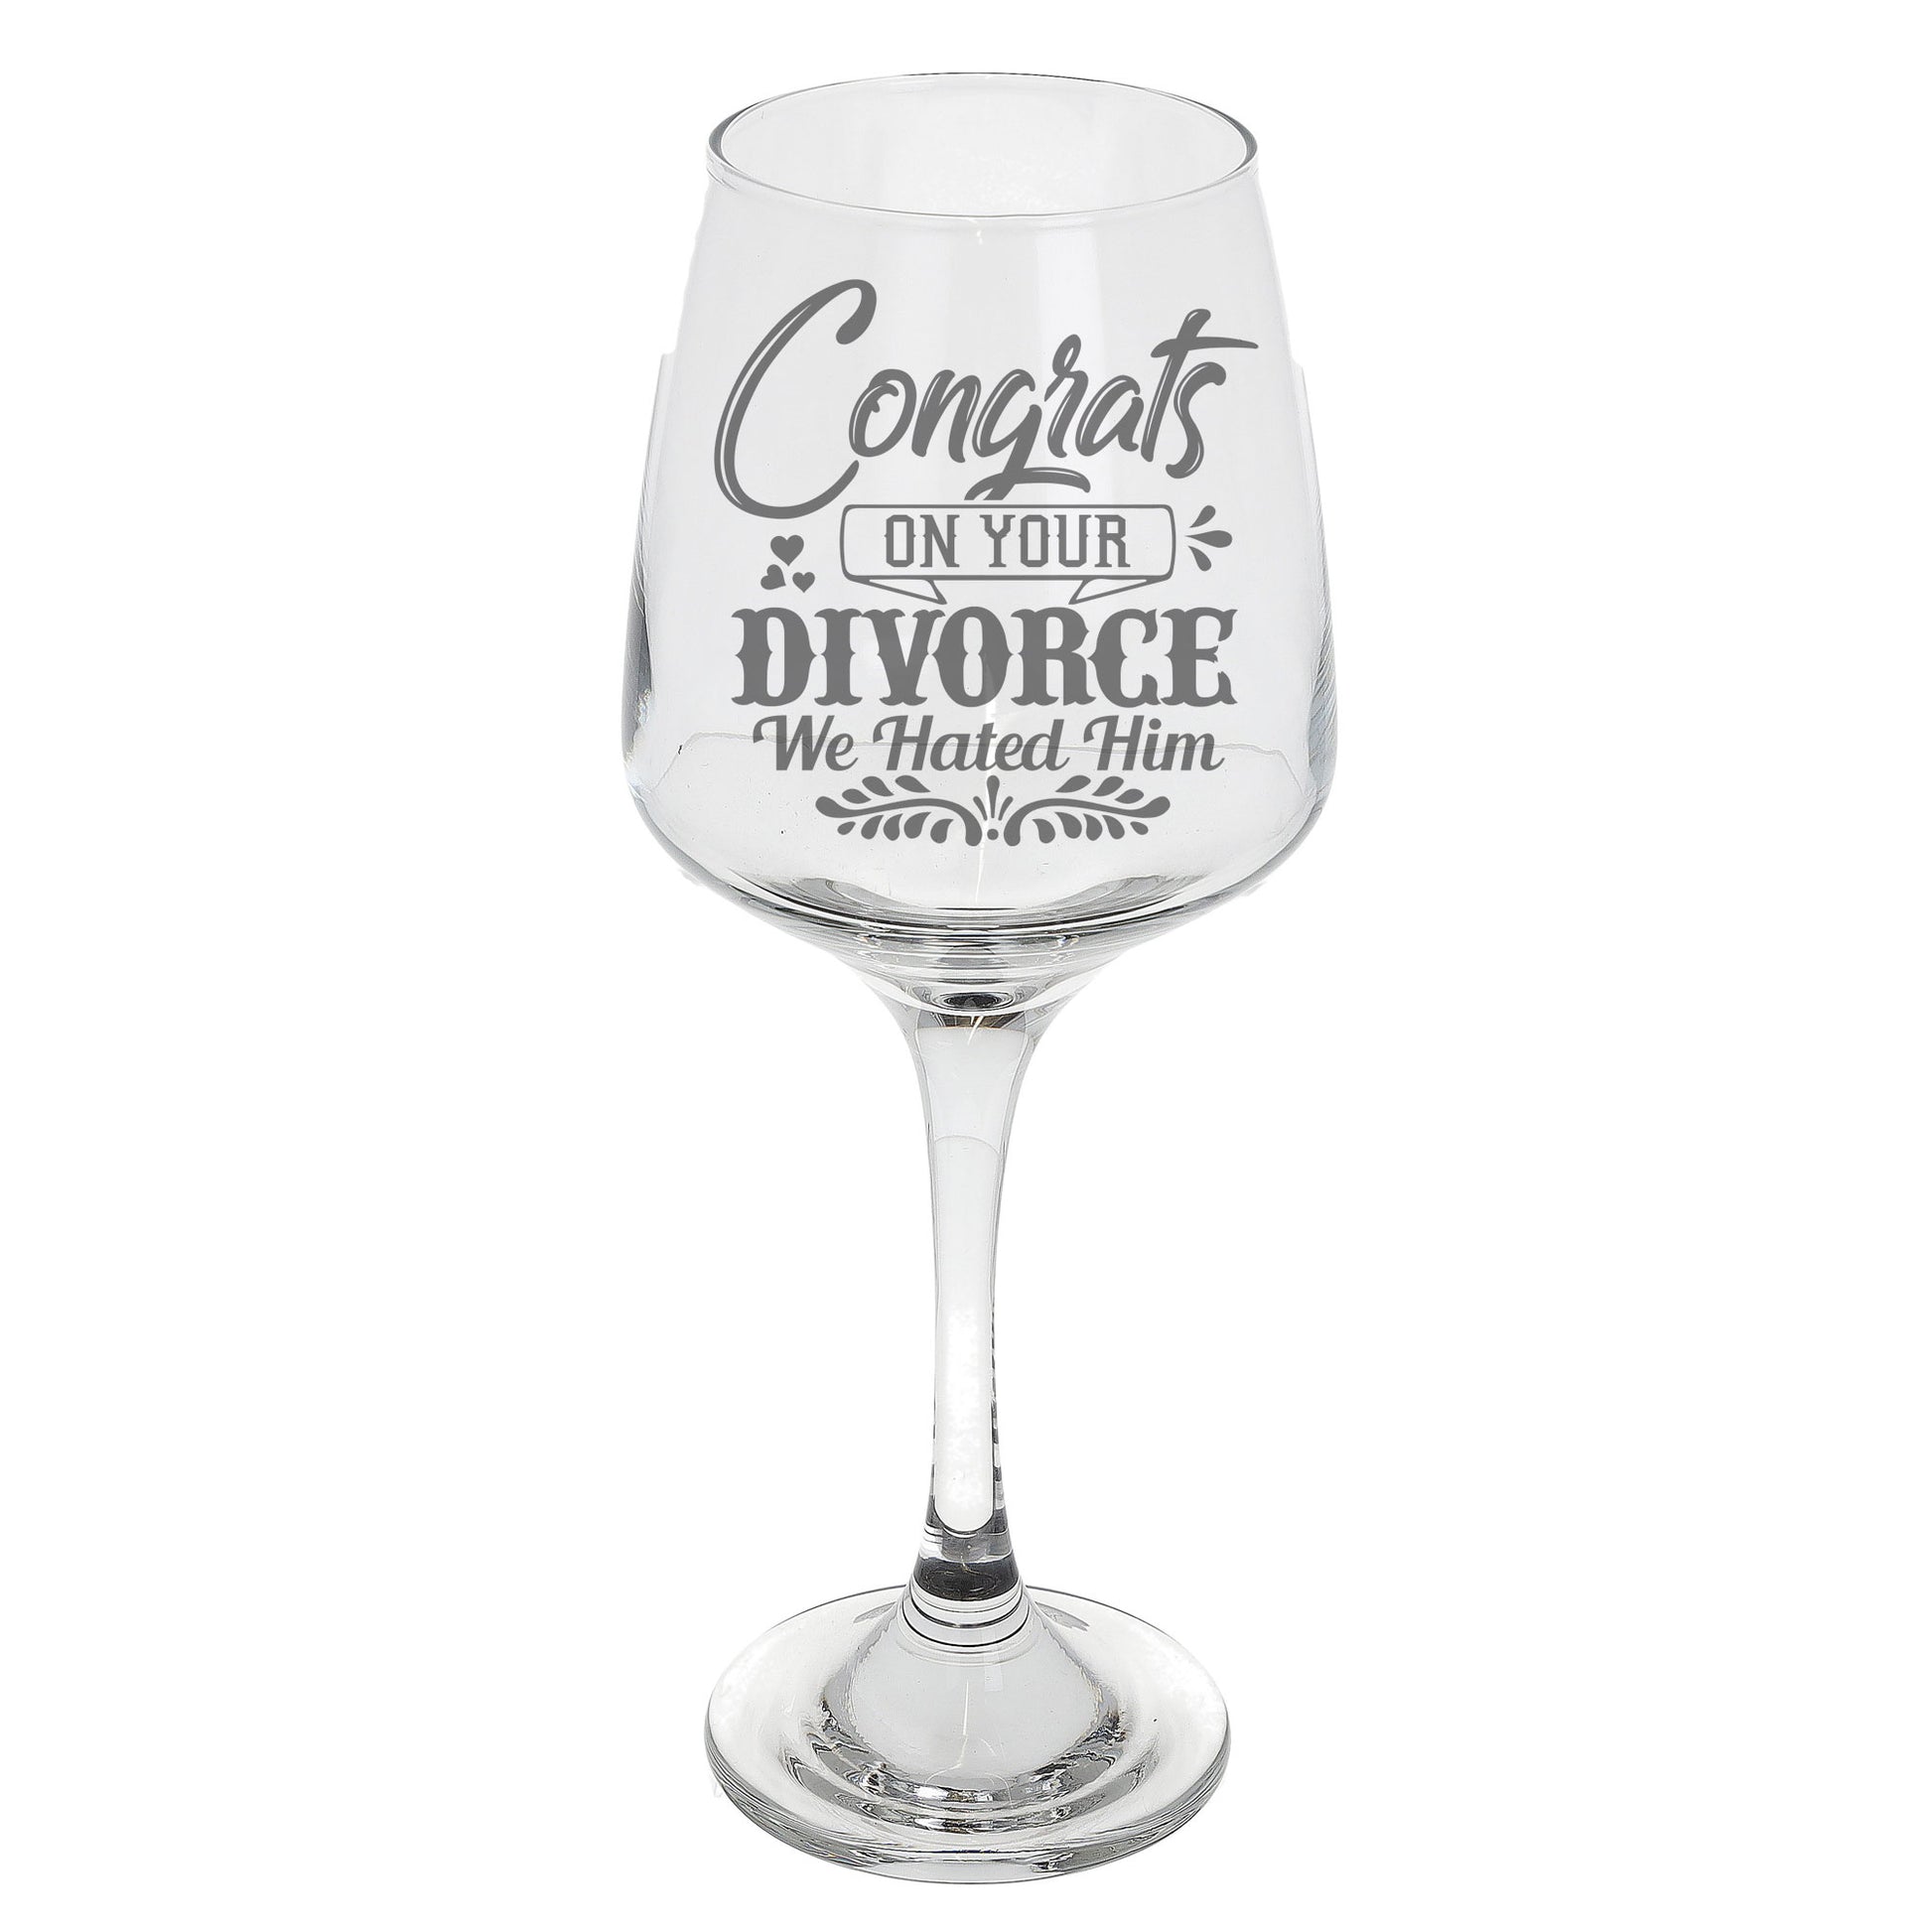 Congrats On Your Divorce We Hated Him Wine Glass  - Always Looking Good -   